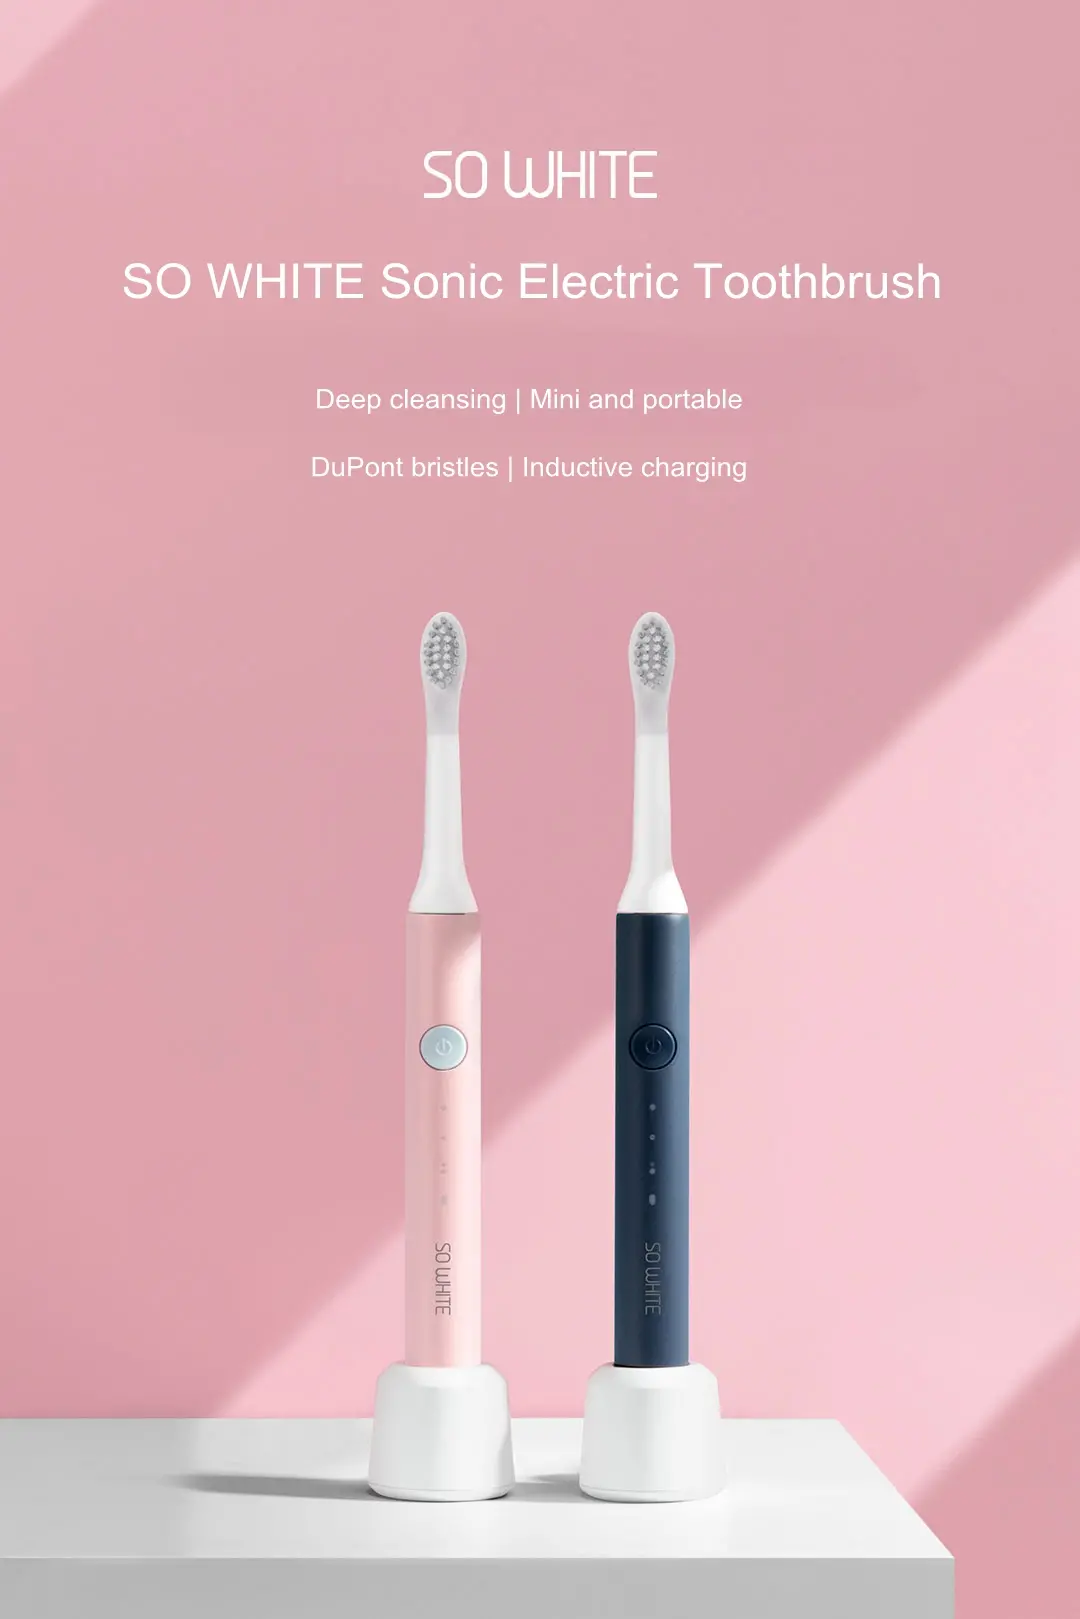 [2019NEW] XIAOMI Soocas SO WHITE Sonic Electric Toothbrush Wireless Induction Charging IPX7 Waterproof - Blue